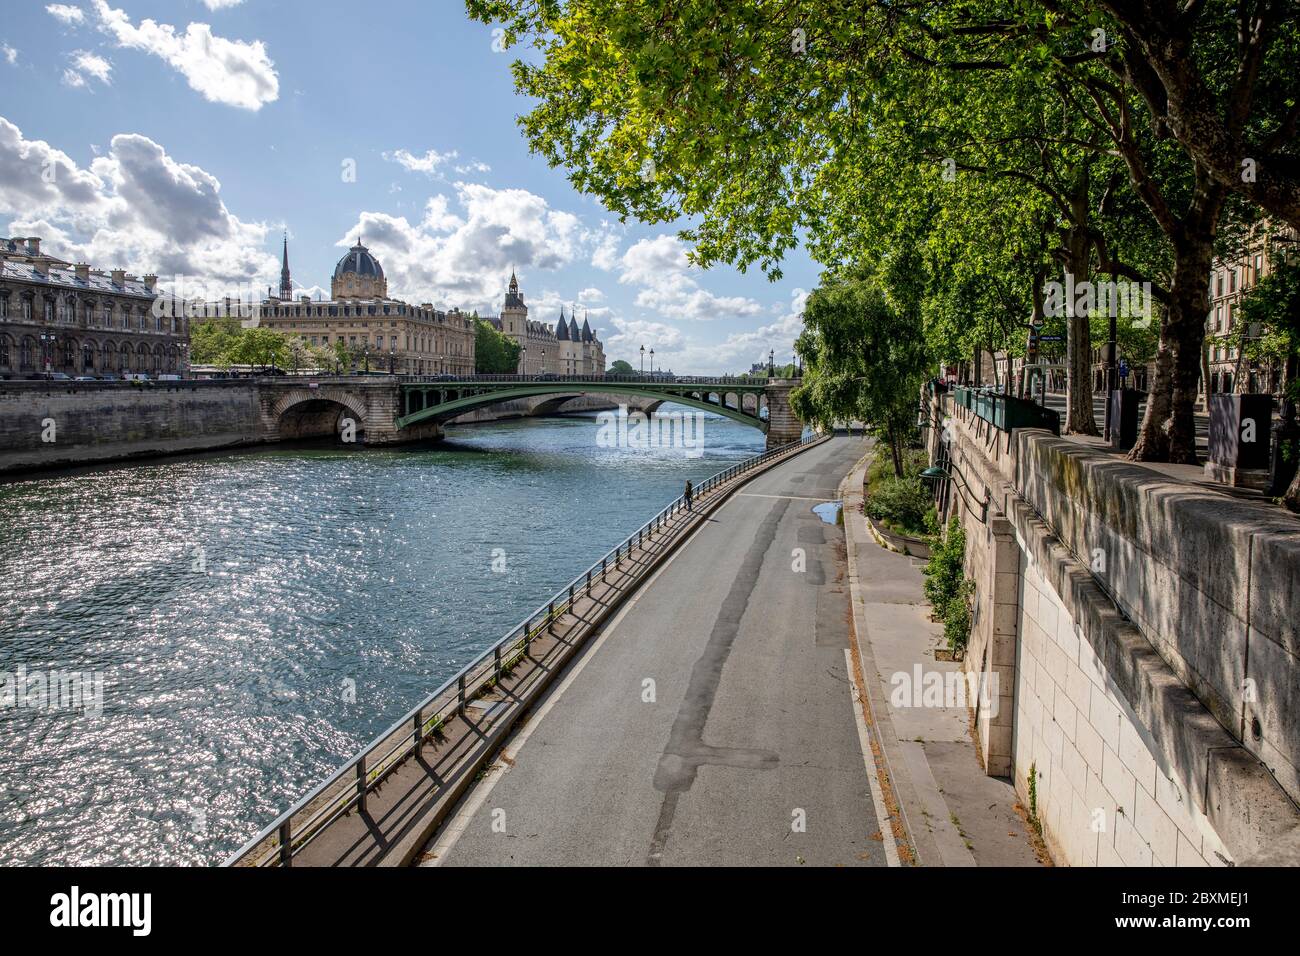 Paris, France - May 1, 2020: View of the Conciergerie, the Hotel Dieu and the bridges over the Seine during the containment measures due to the corona Stock Photo